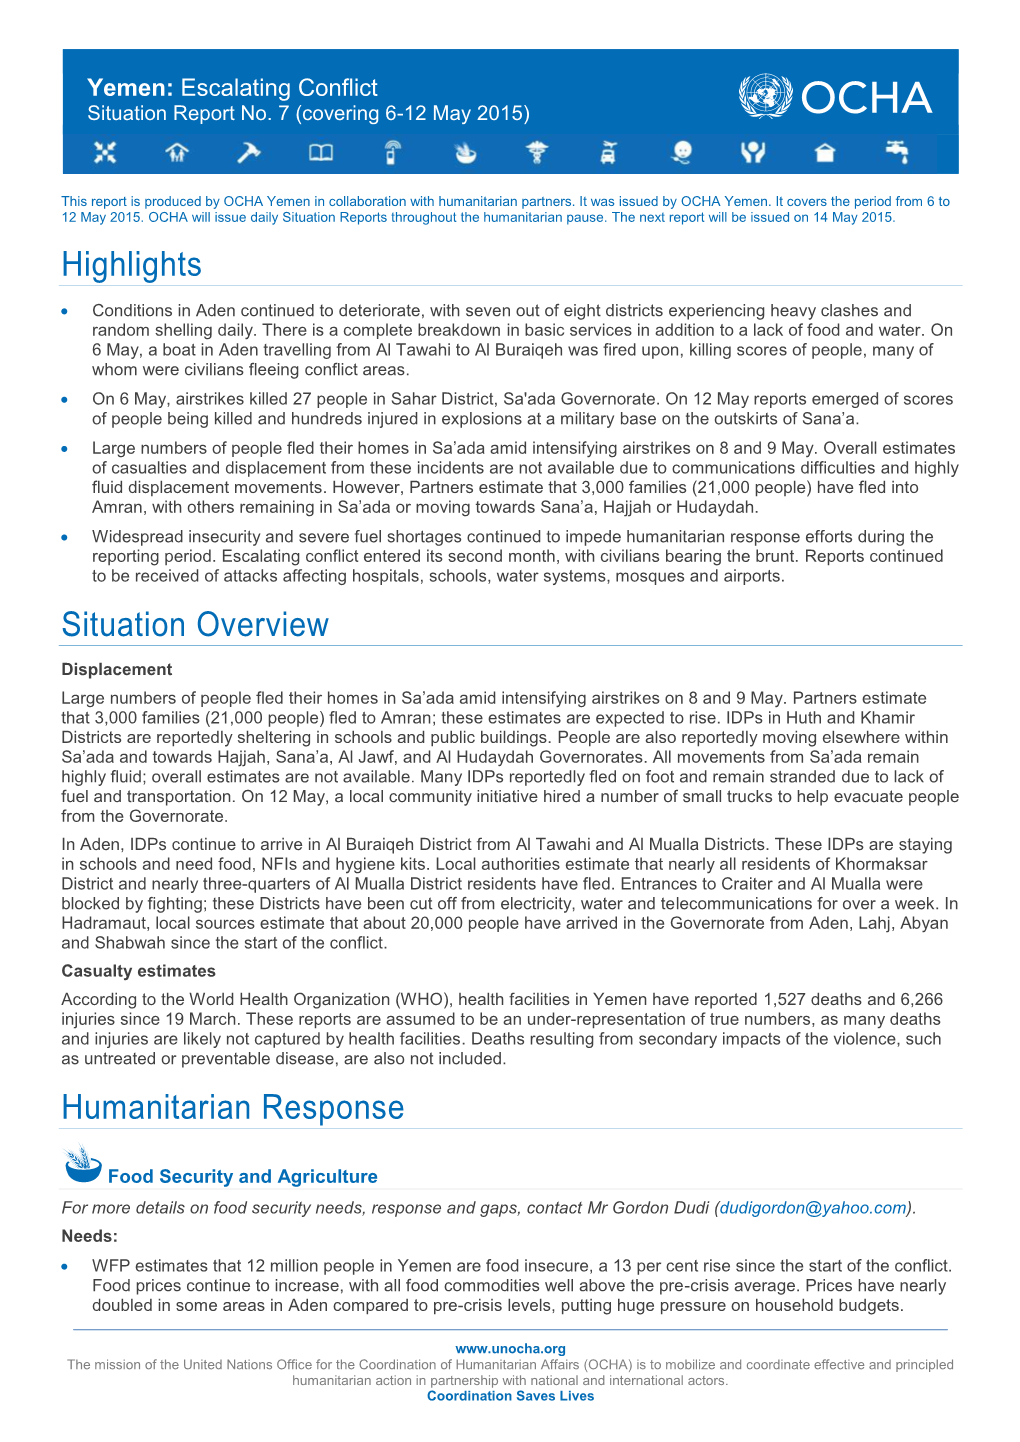 Highlights Situation Overview Humanitarian Response